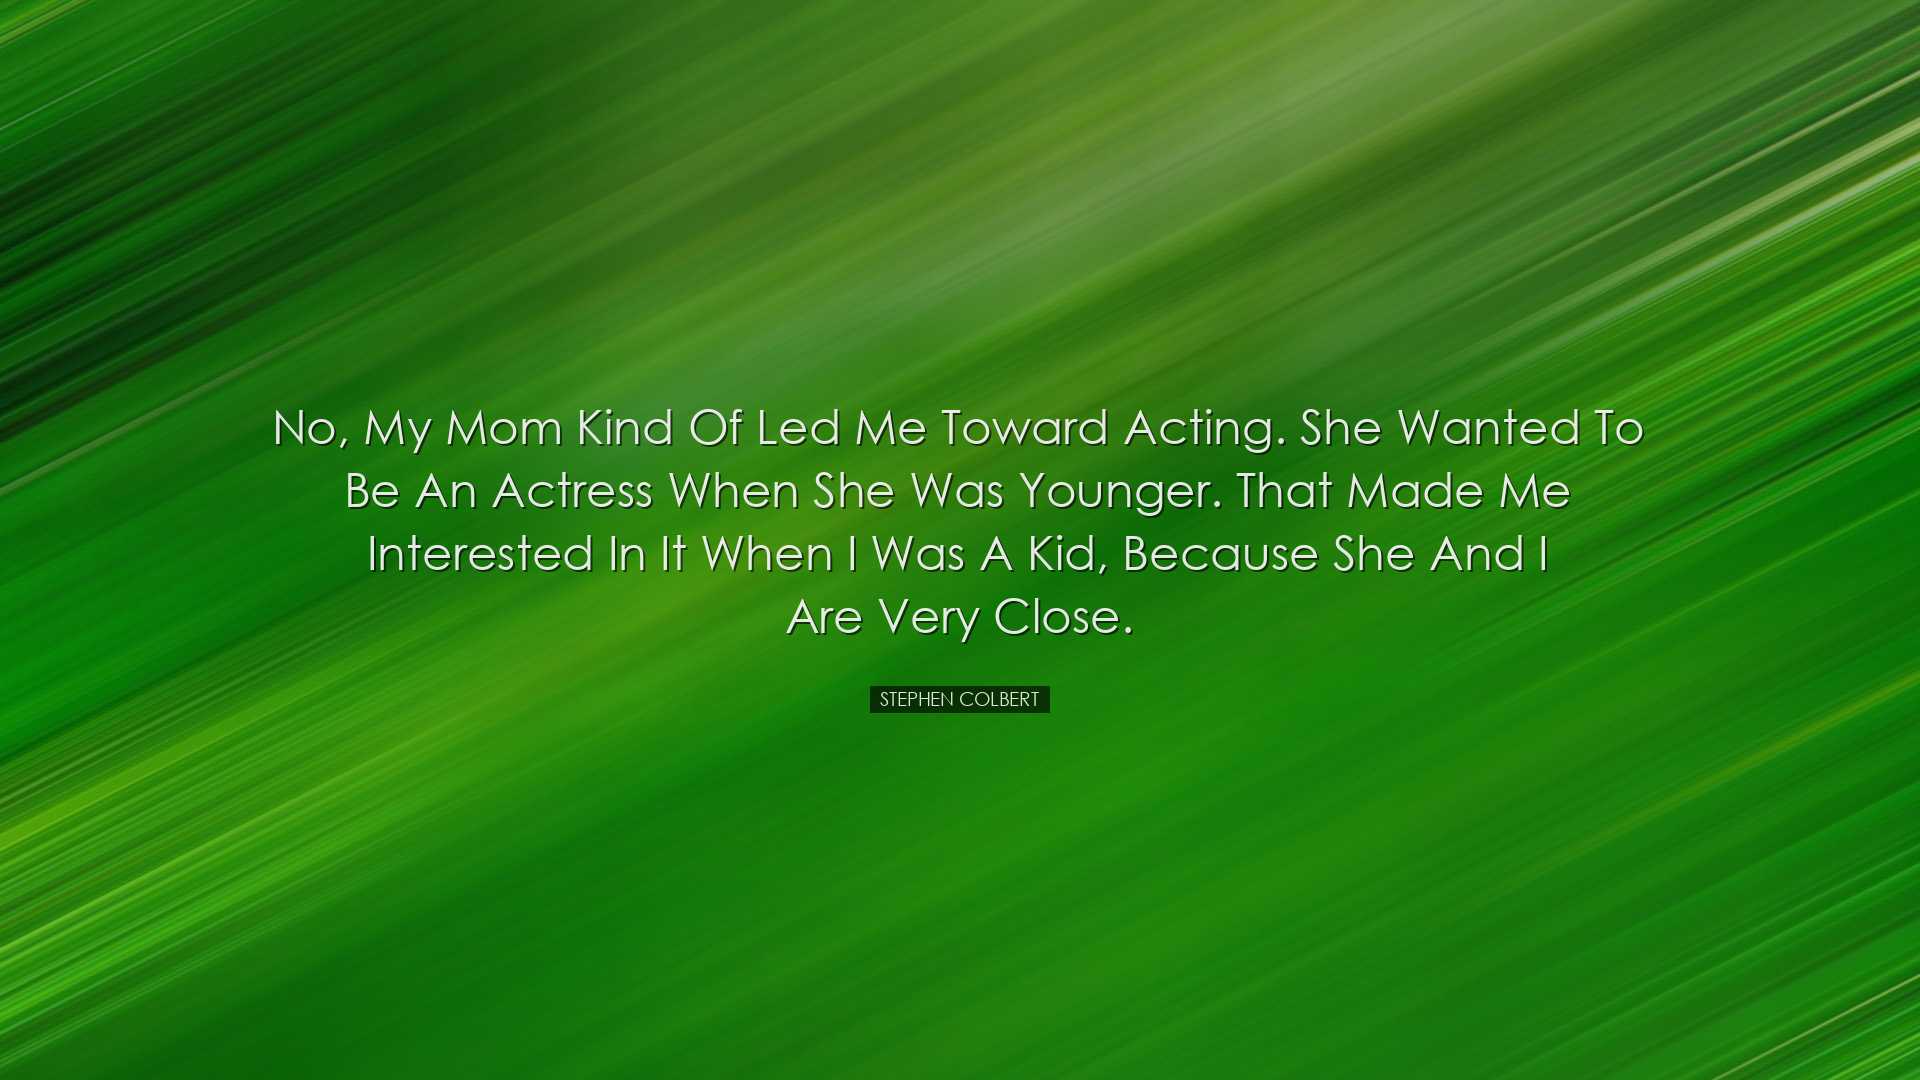 No, my mom kind of led me toward acting. She wanted to be an actre